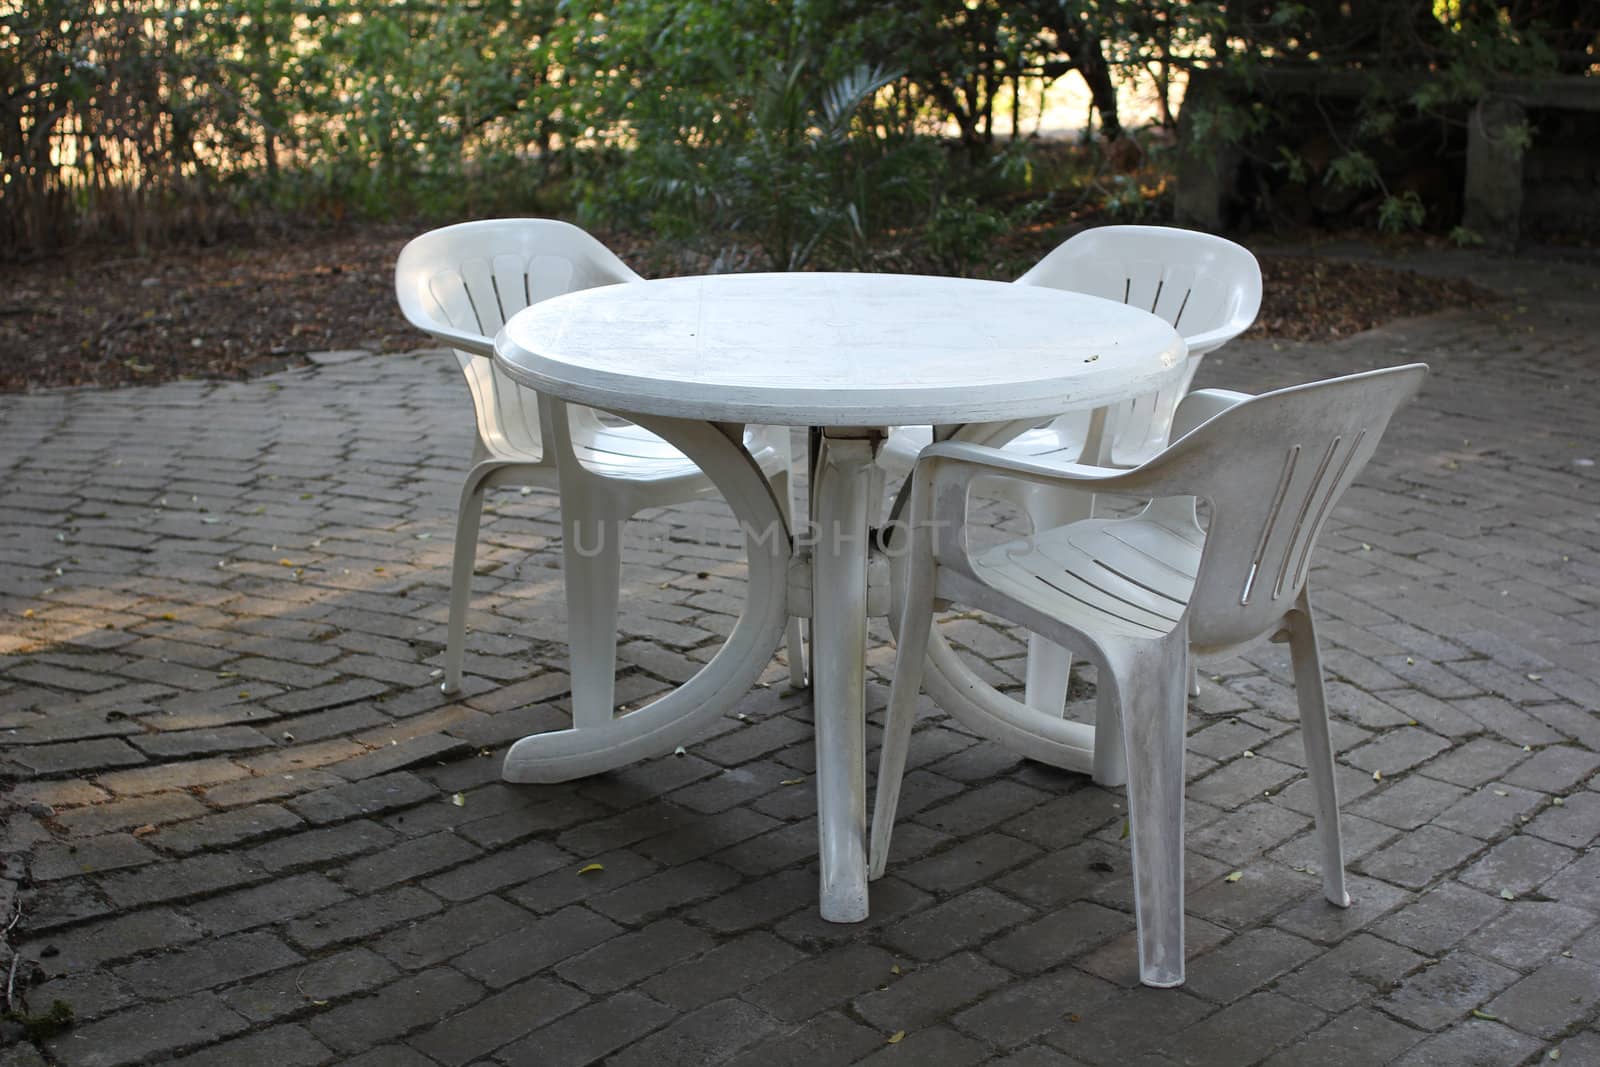 Plastic table with plastic outdoor